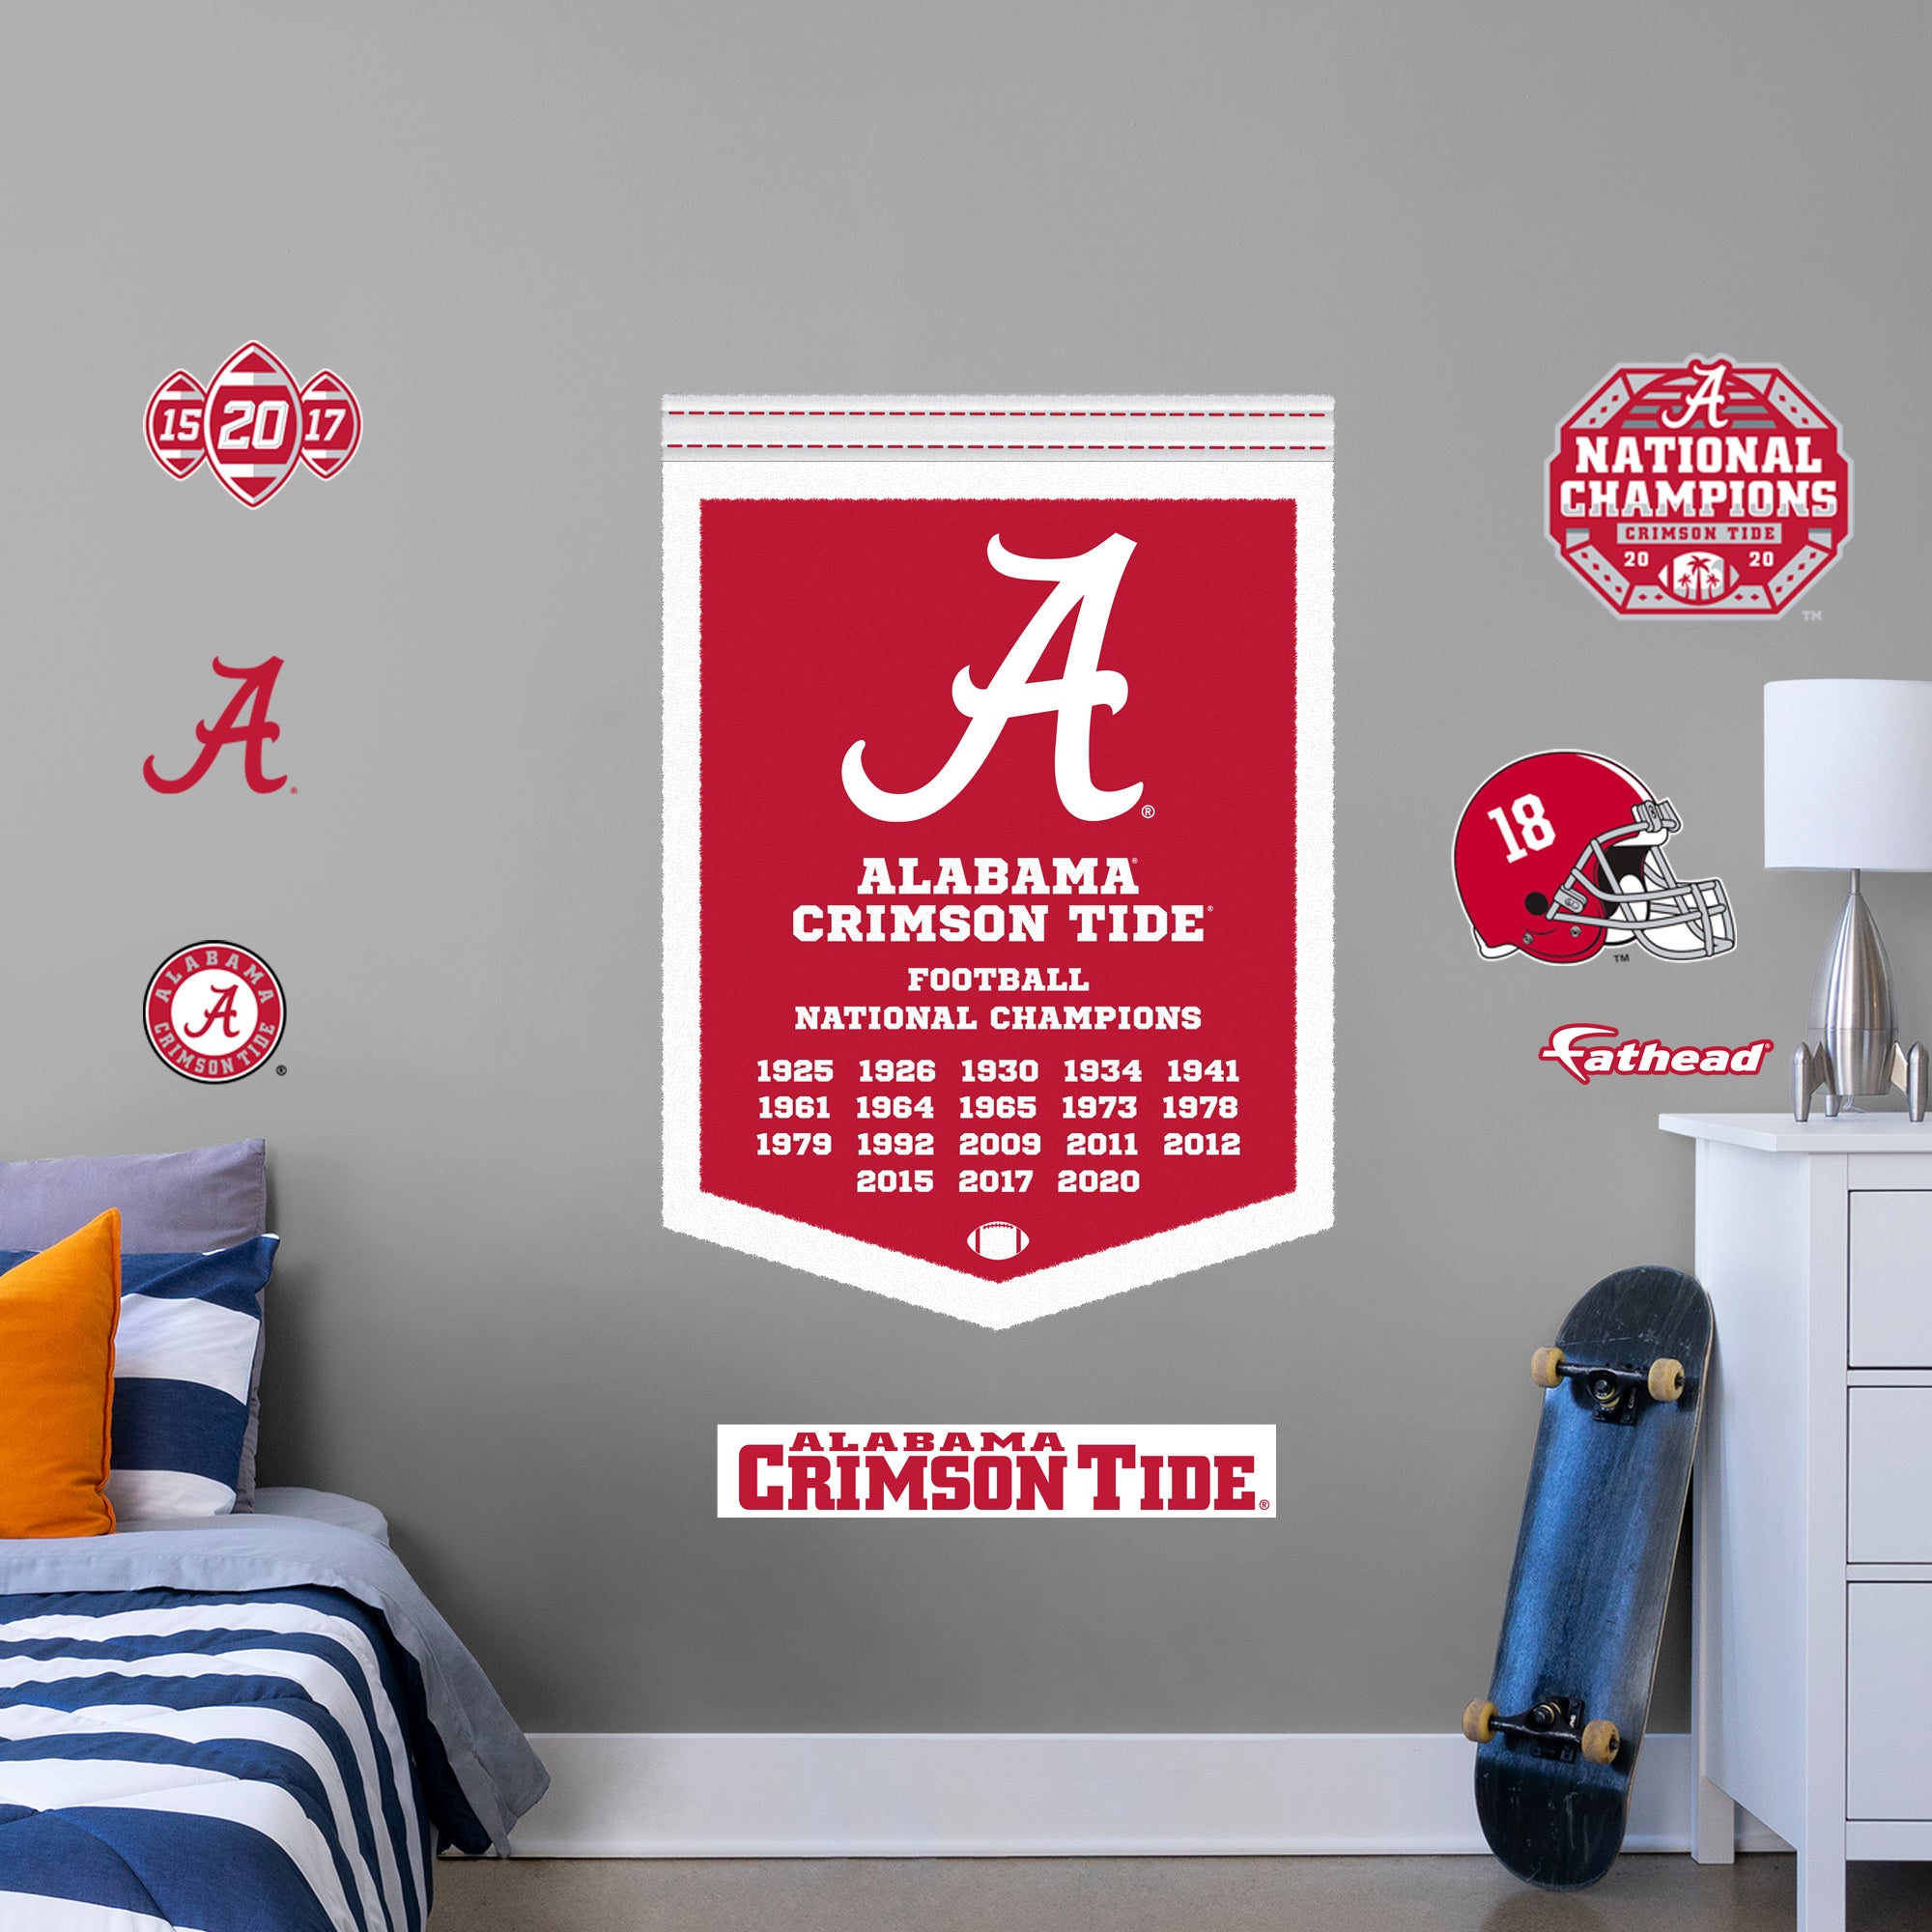 Alabama Crimson Tide 2020 Championship Banner - Officially Licensed NCAA Removable Wall Decal Giant Decal (34"W x 48"H) by Fathe